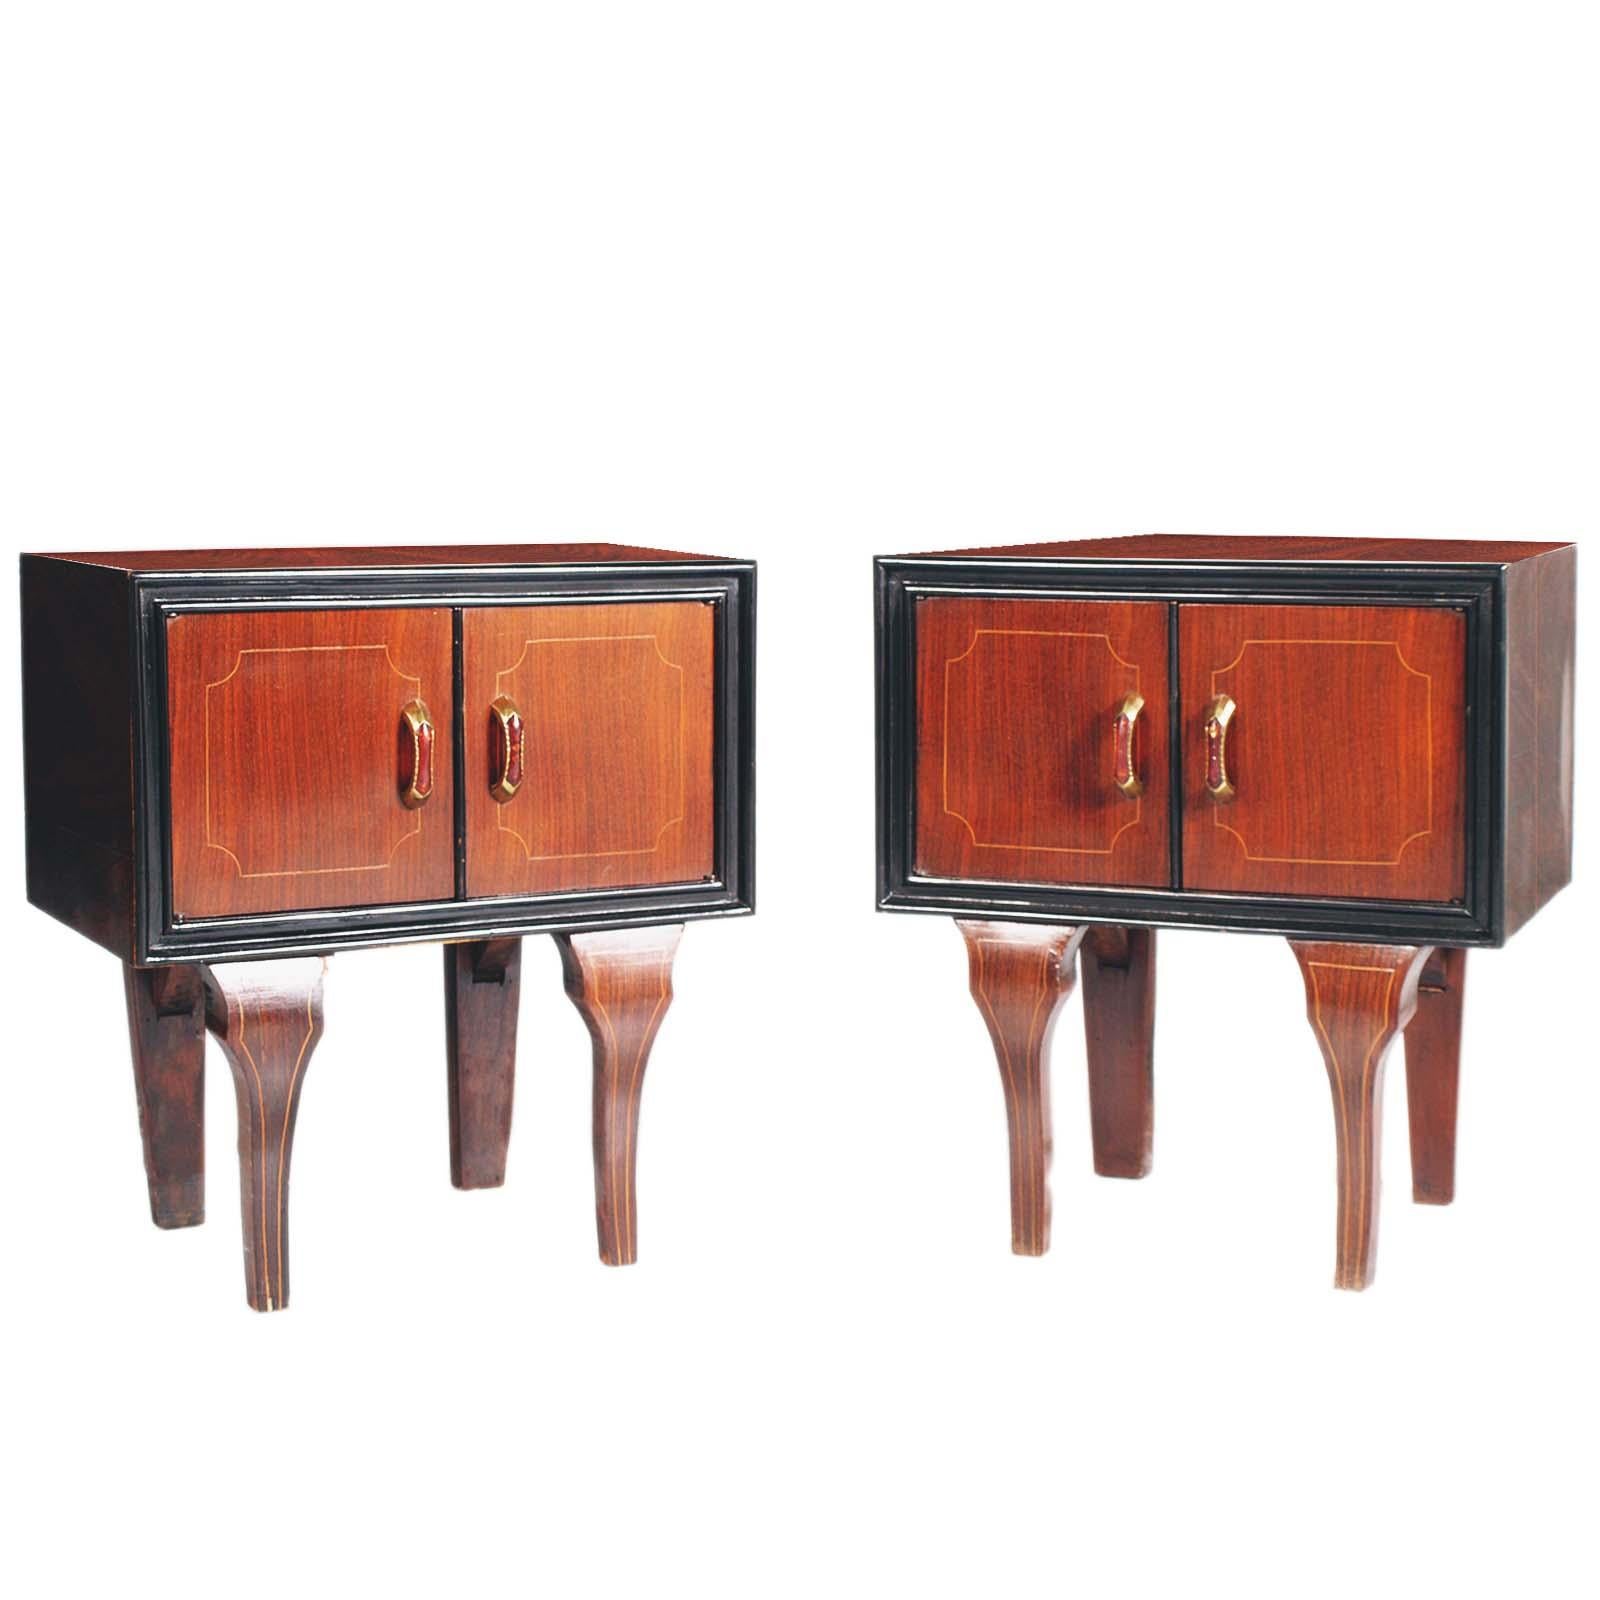 Pair of art decò nightstands , early 1900s by Testolini Frères Venice, two-tone walnut veneer and with beech inlay. Golden metal handles embellished with a bakelite insert, a precious synthetic resin for those times to replace jade and